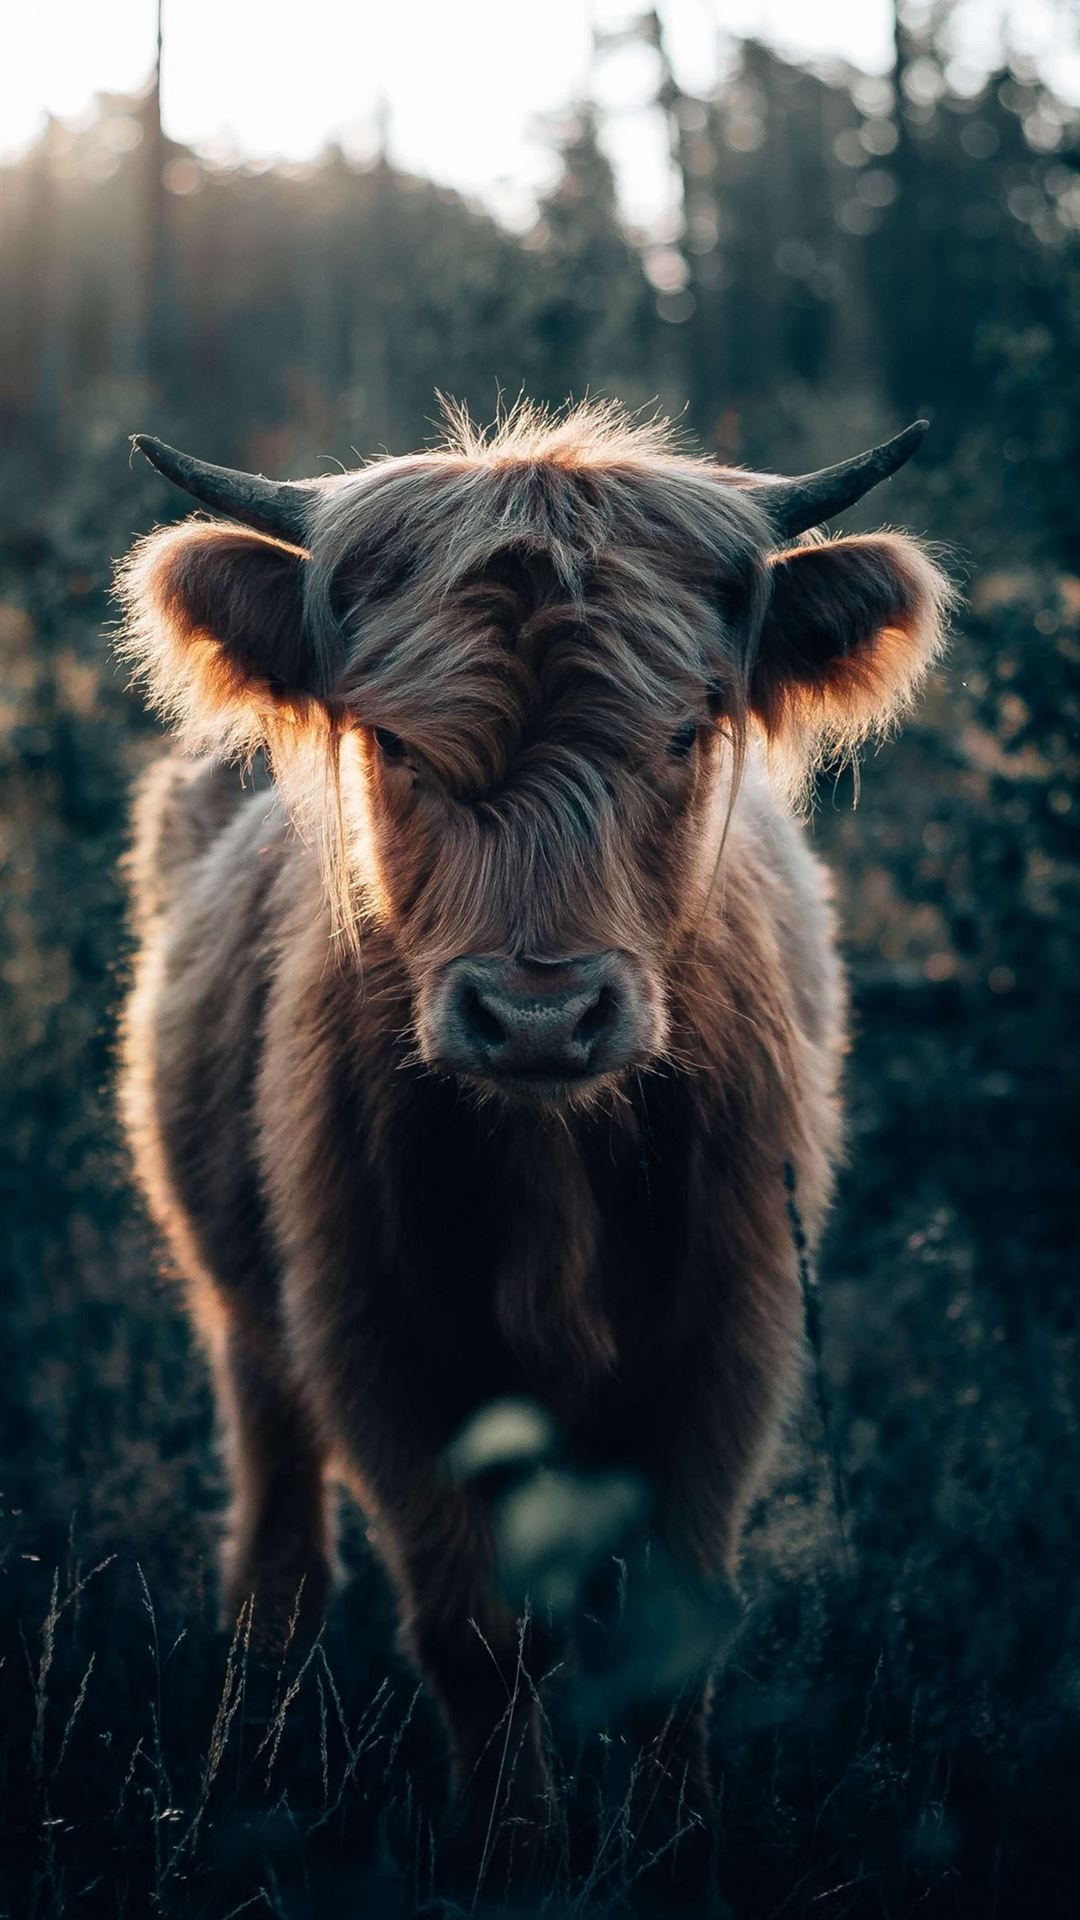 A bull standing in the woods - Cow